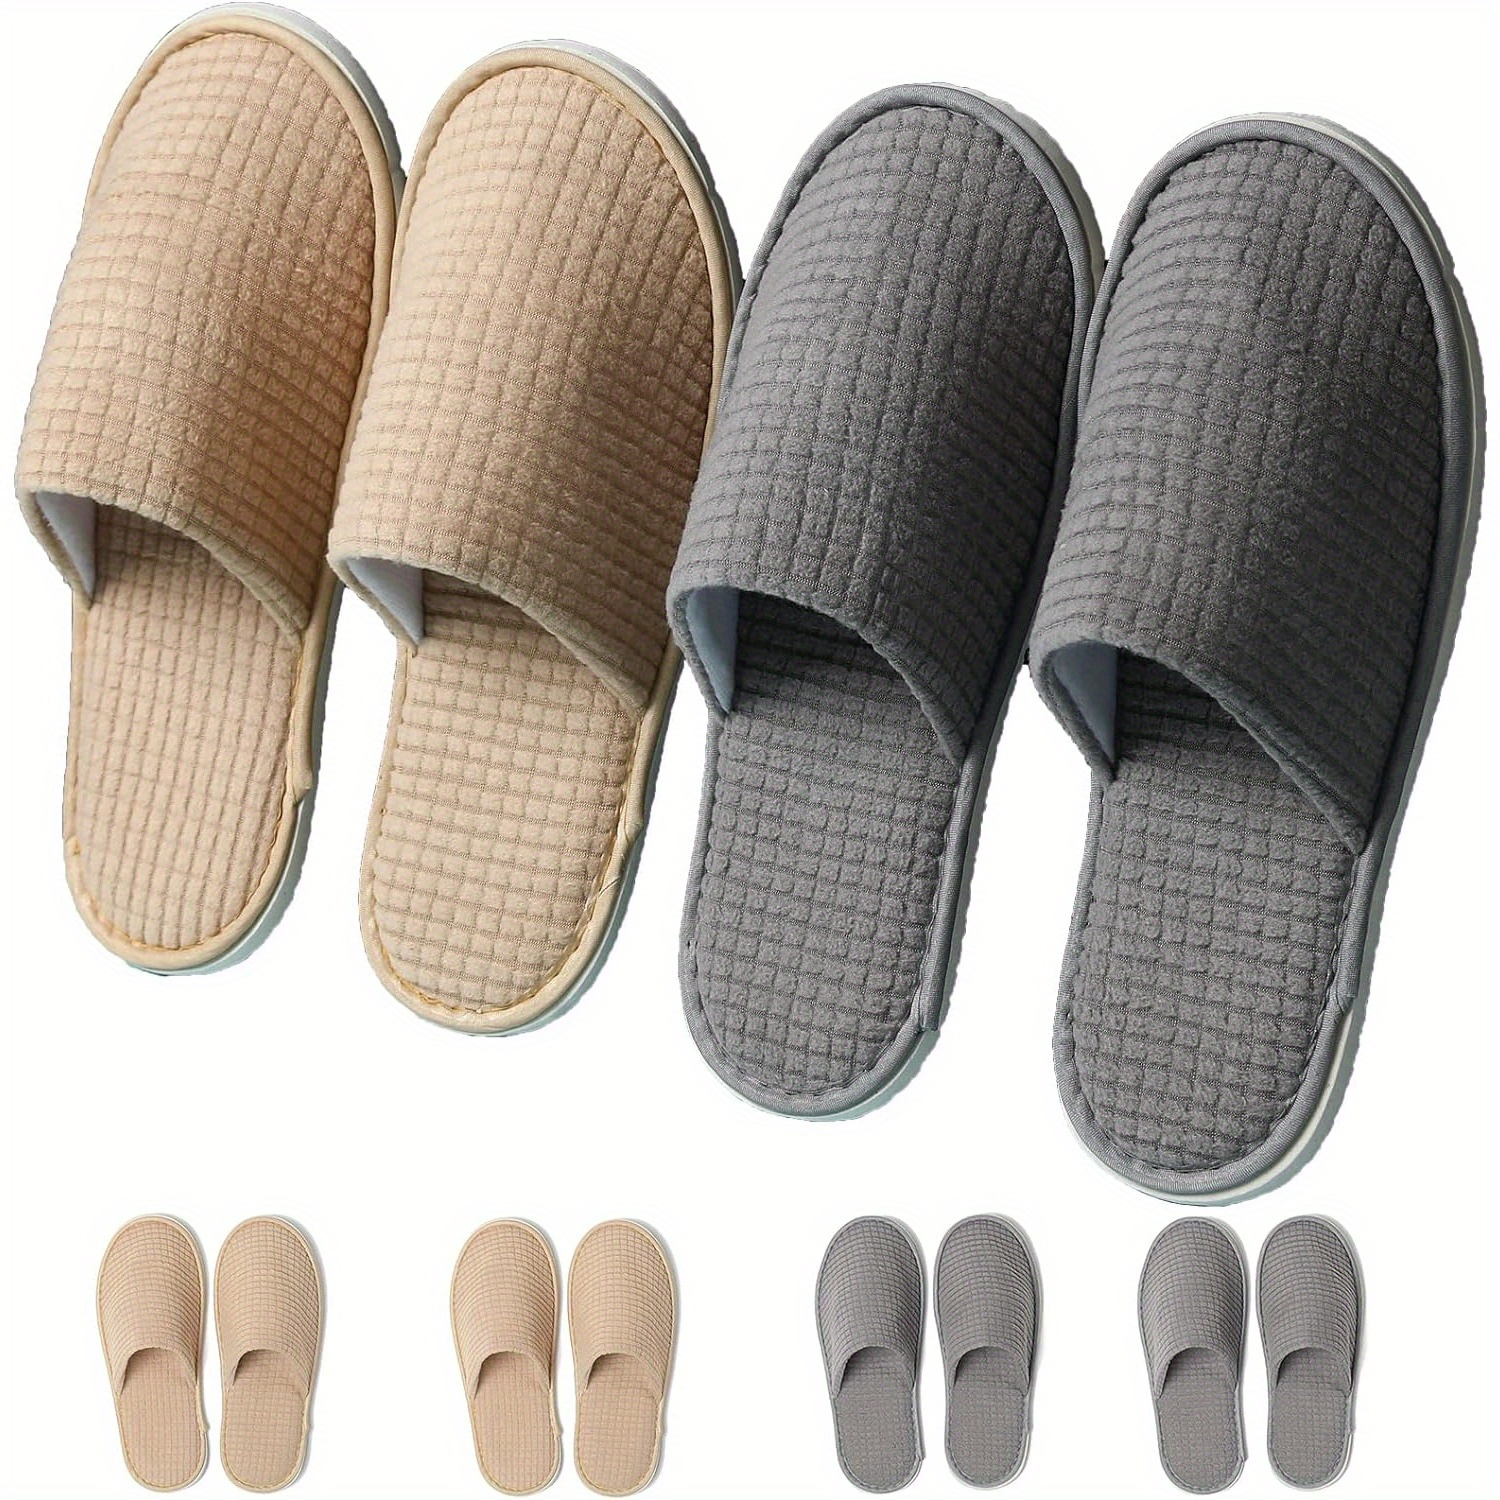 

6pairs Spa Slippers, Guest Disposable Slippers, Soft Hotel Fleece Slippers, Washable Reusable House Unisex Slippers, Bridal Slippers For Wedding Party Bedroom Travel